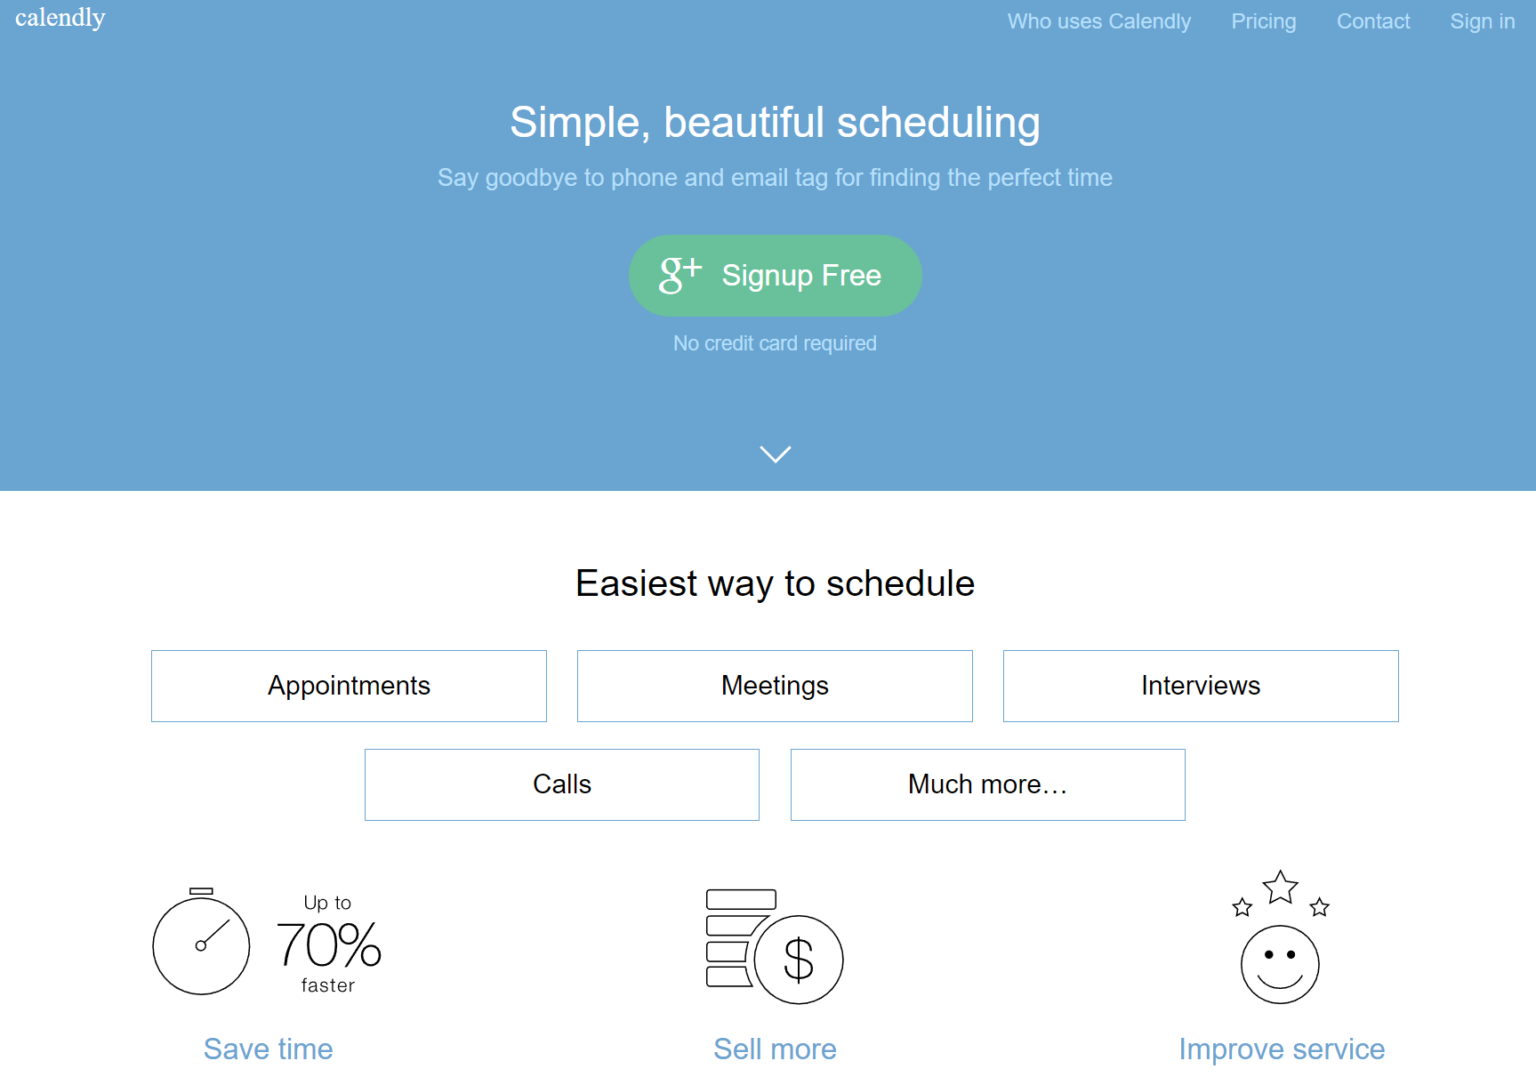 Calendly—The Viral Freemium Product with a 3B Valuation